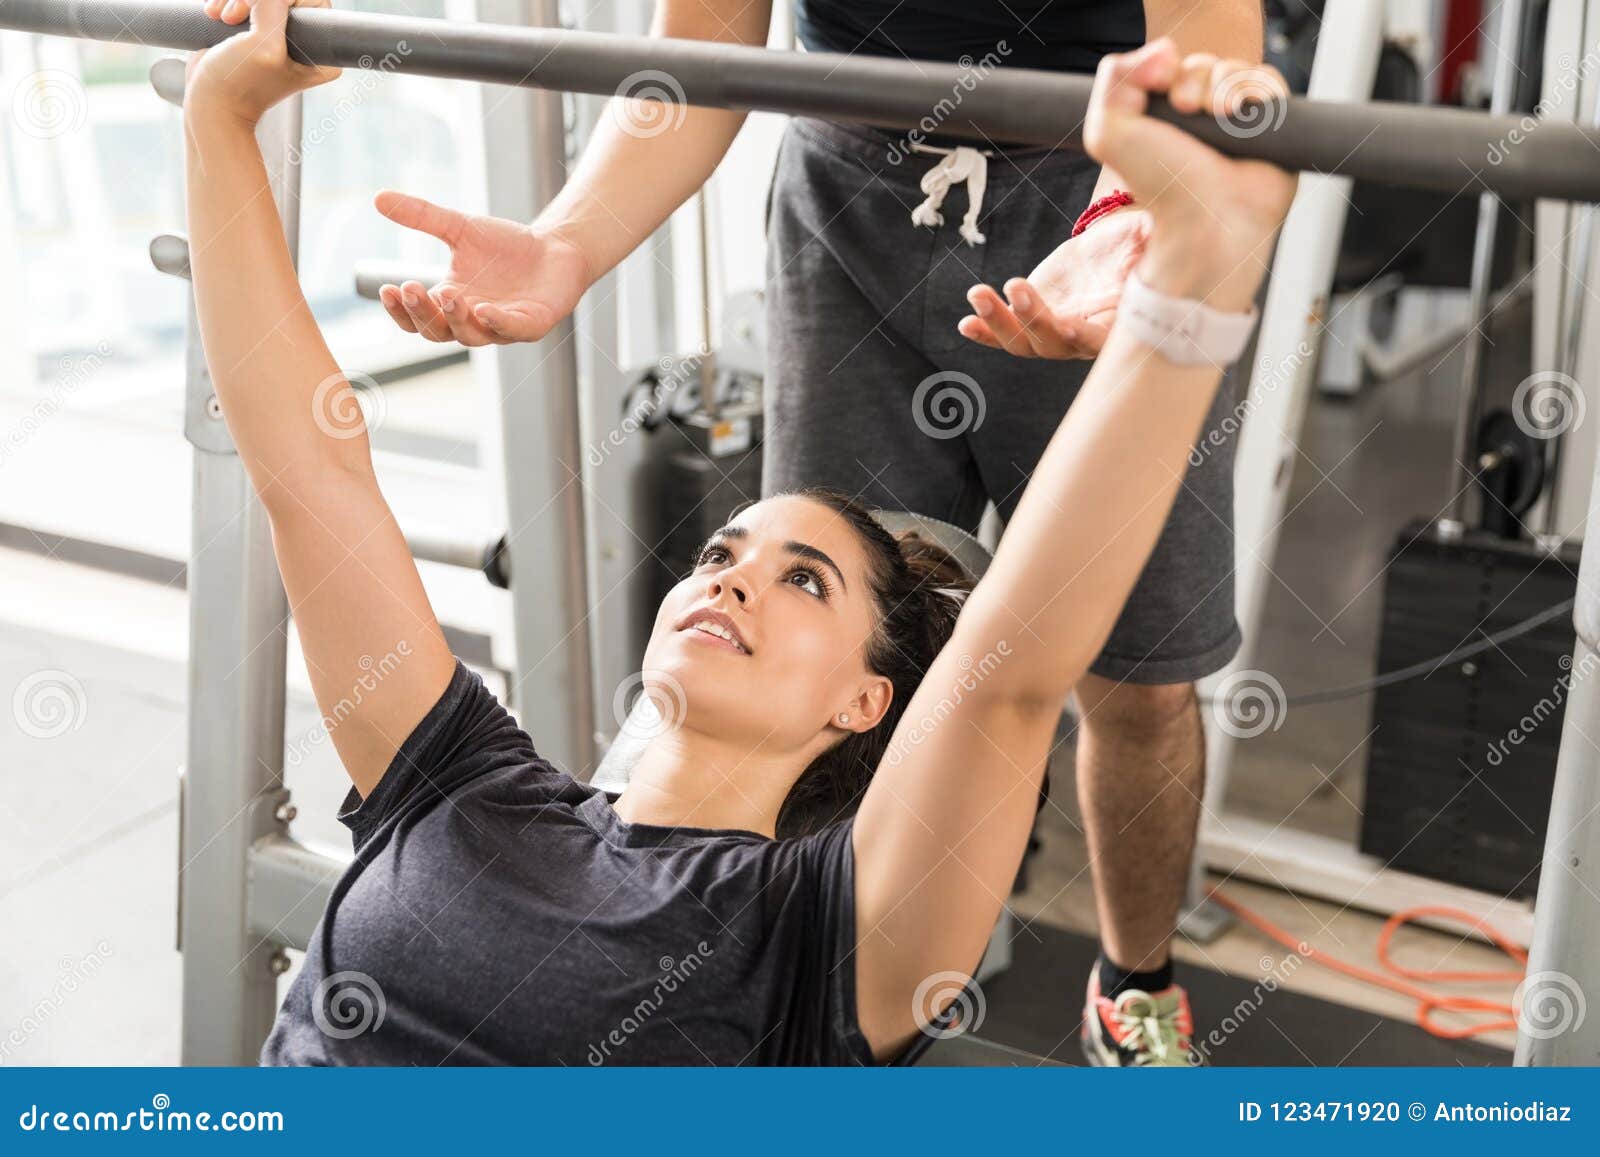 8,508 Chest Press Woman Royalty-Free Photos and Stock Images